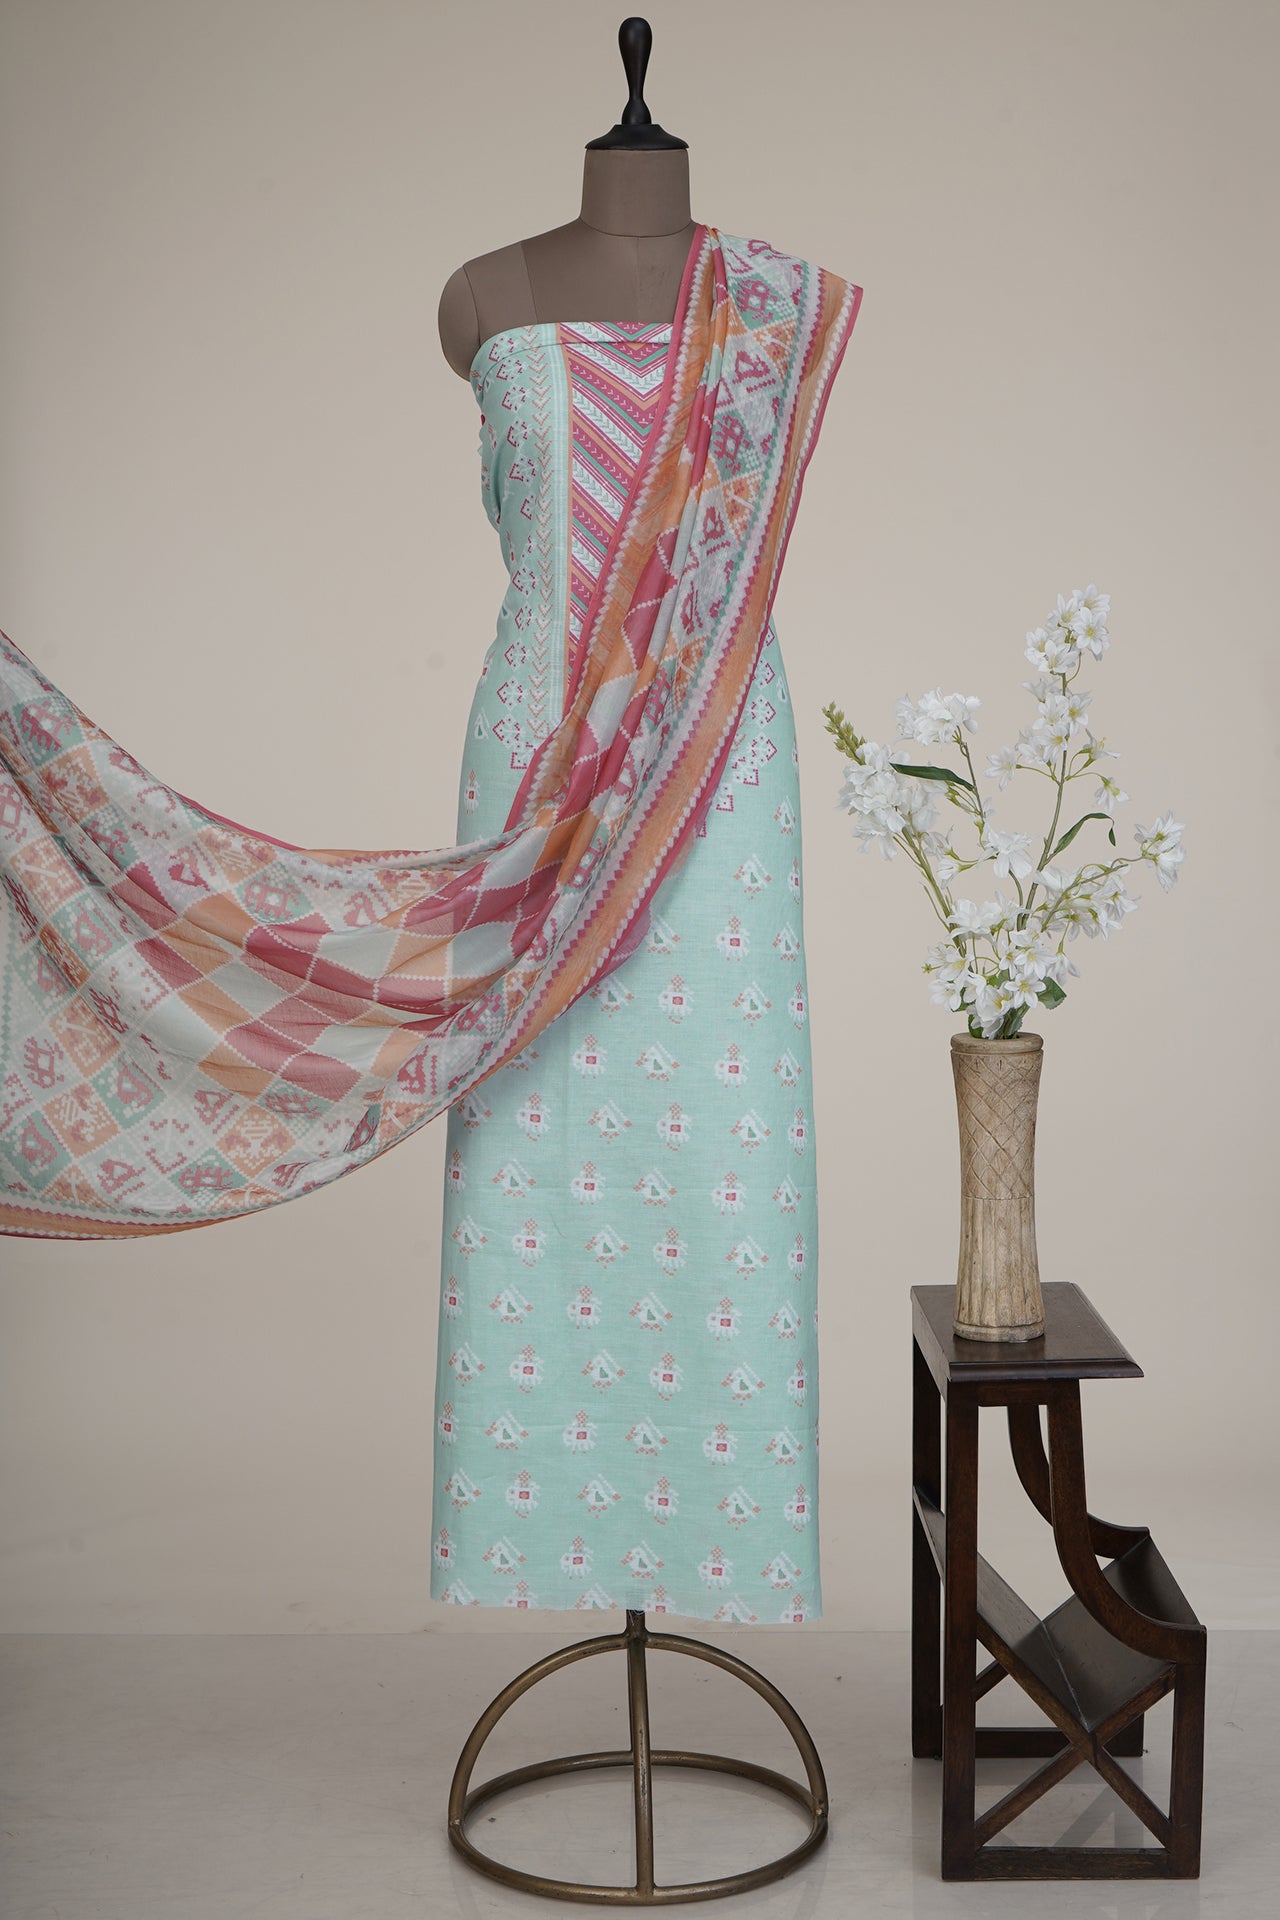 Mint Green-Pink Color Digital Printed Patola Pattern Cotton Linen Suit with Chanderi Dupatta